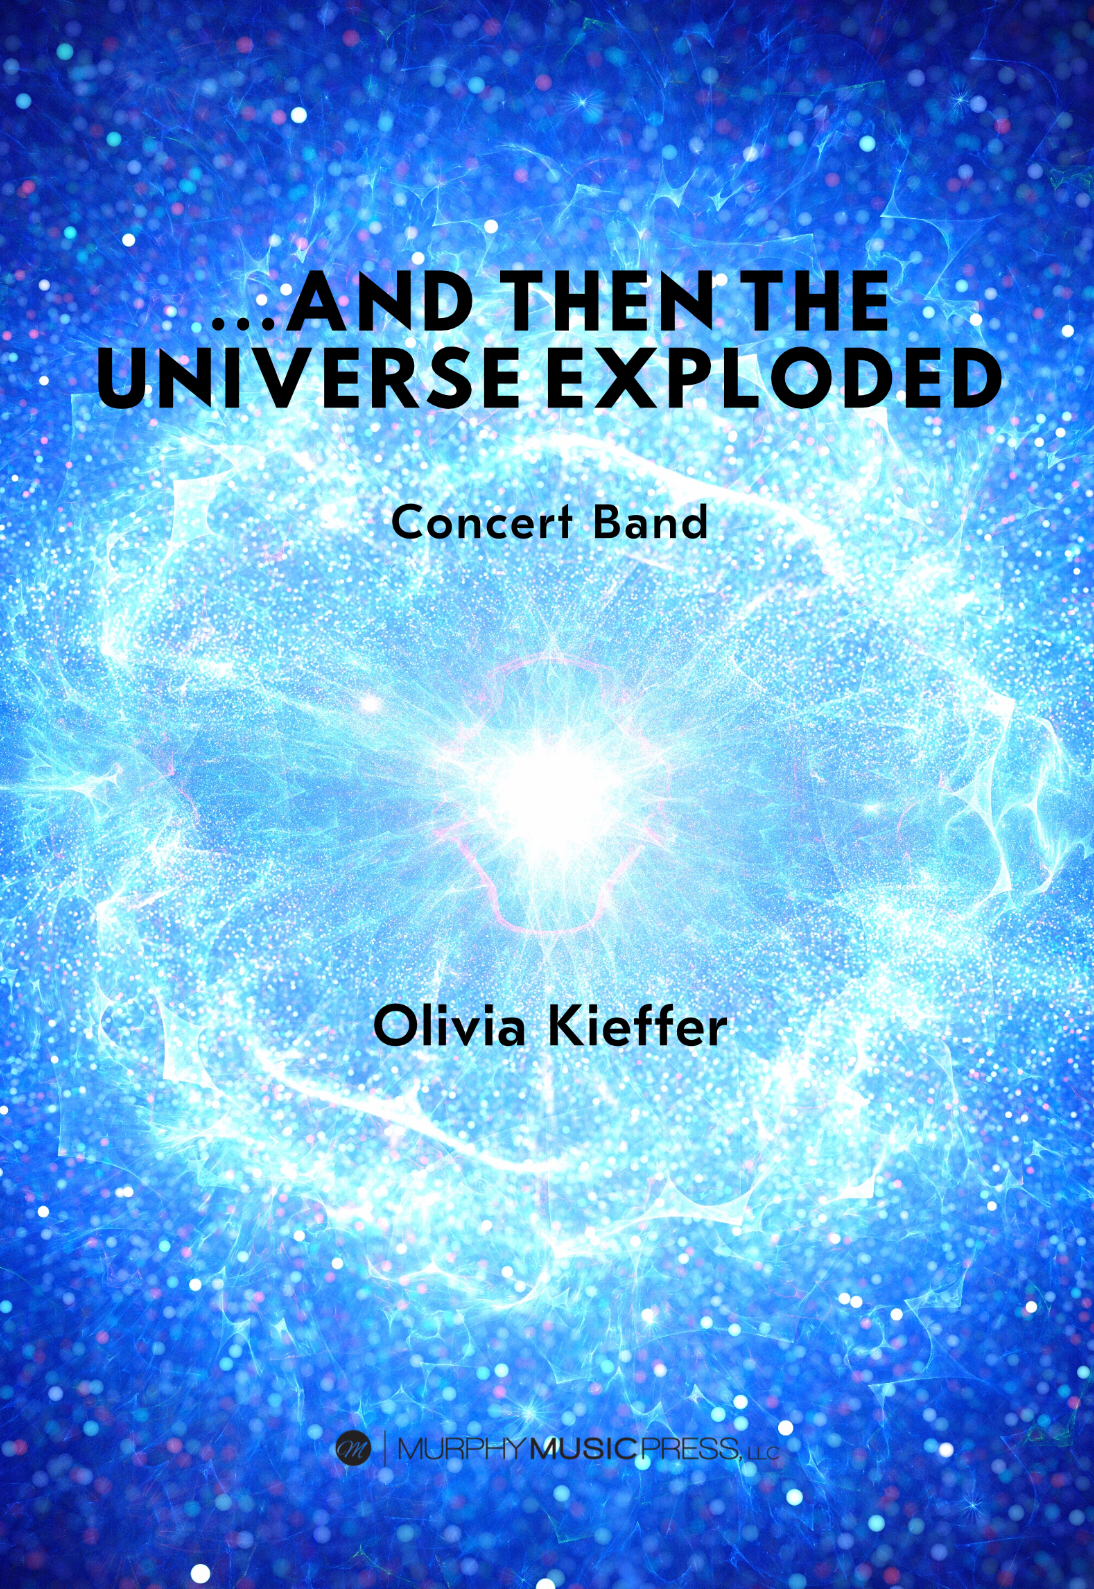 ...and Then The Universe Exploded by Olivia Kieffer